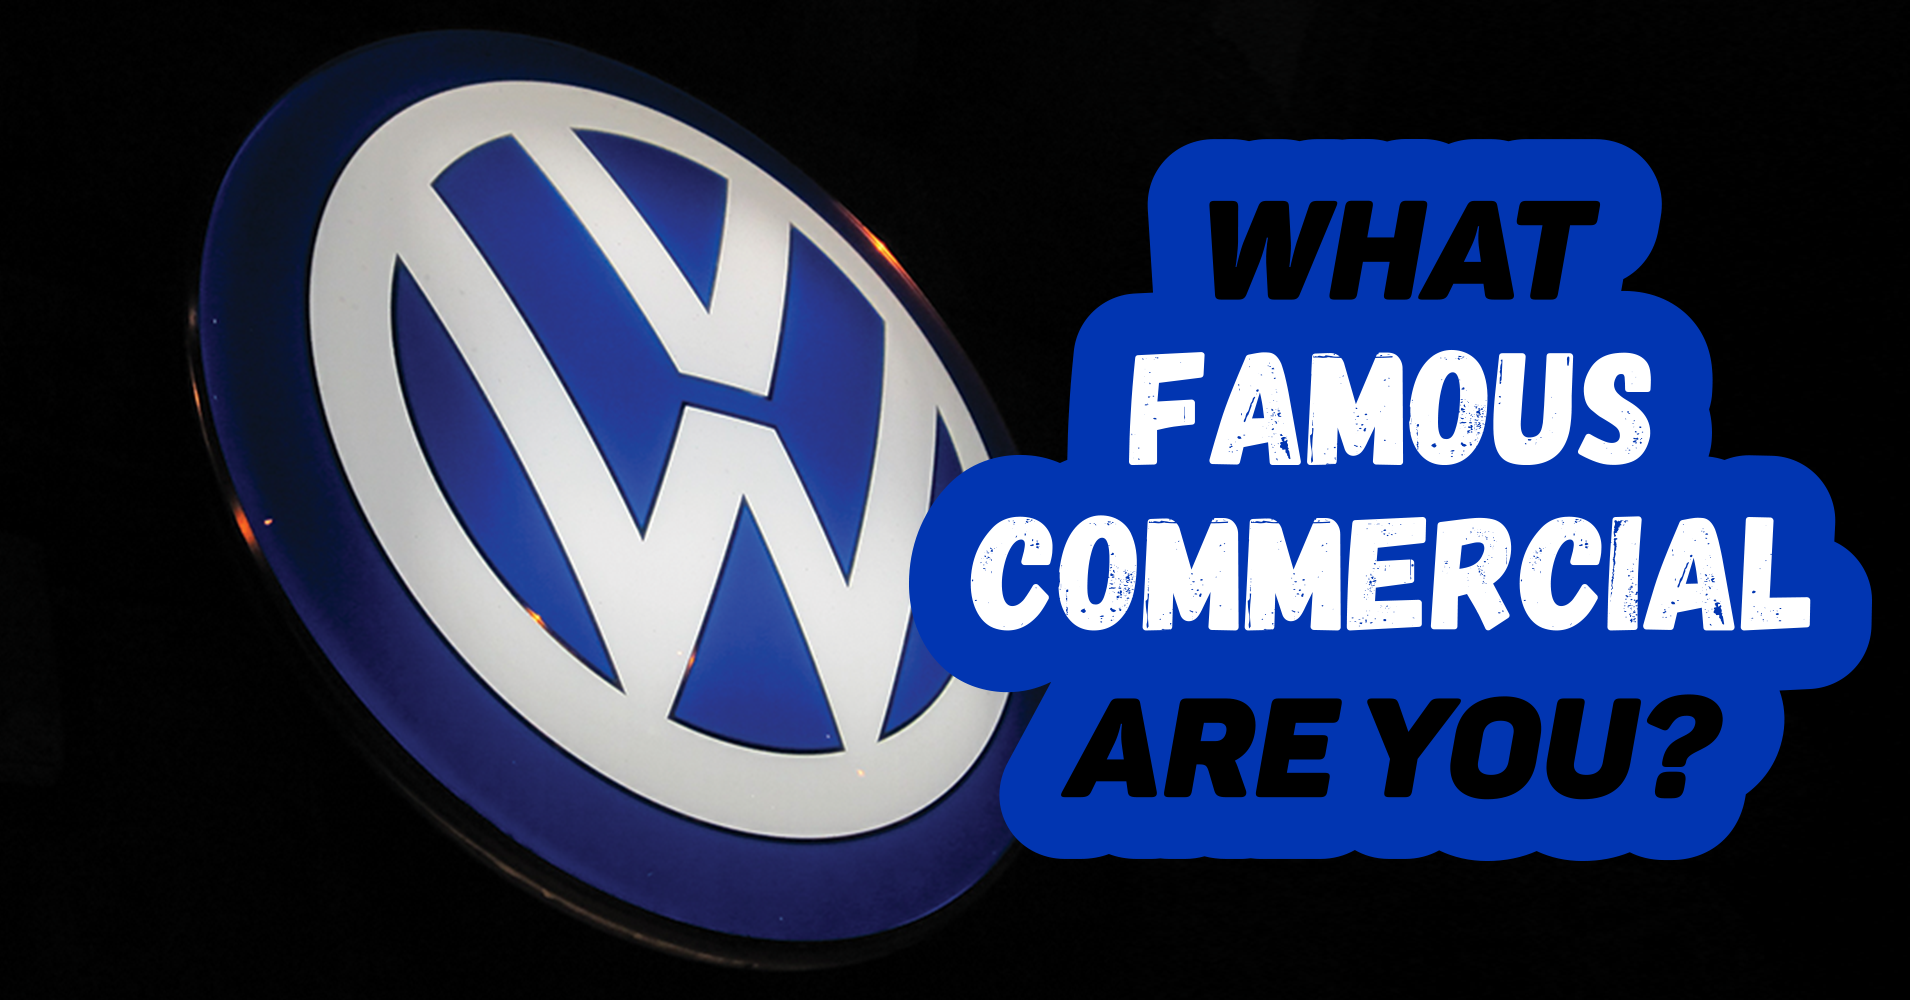 what-famous-commercial-are-you-question-5-how-many-letters-are-in-your-first-name